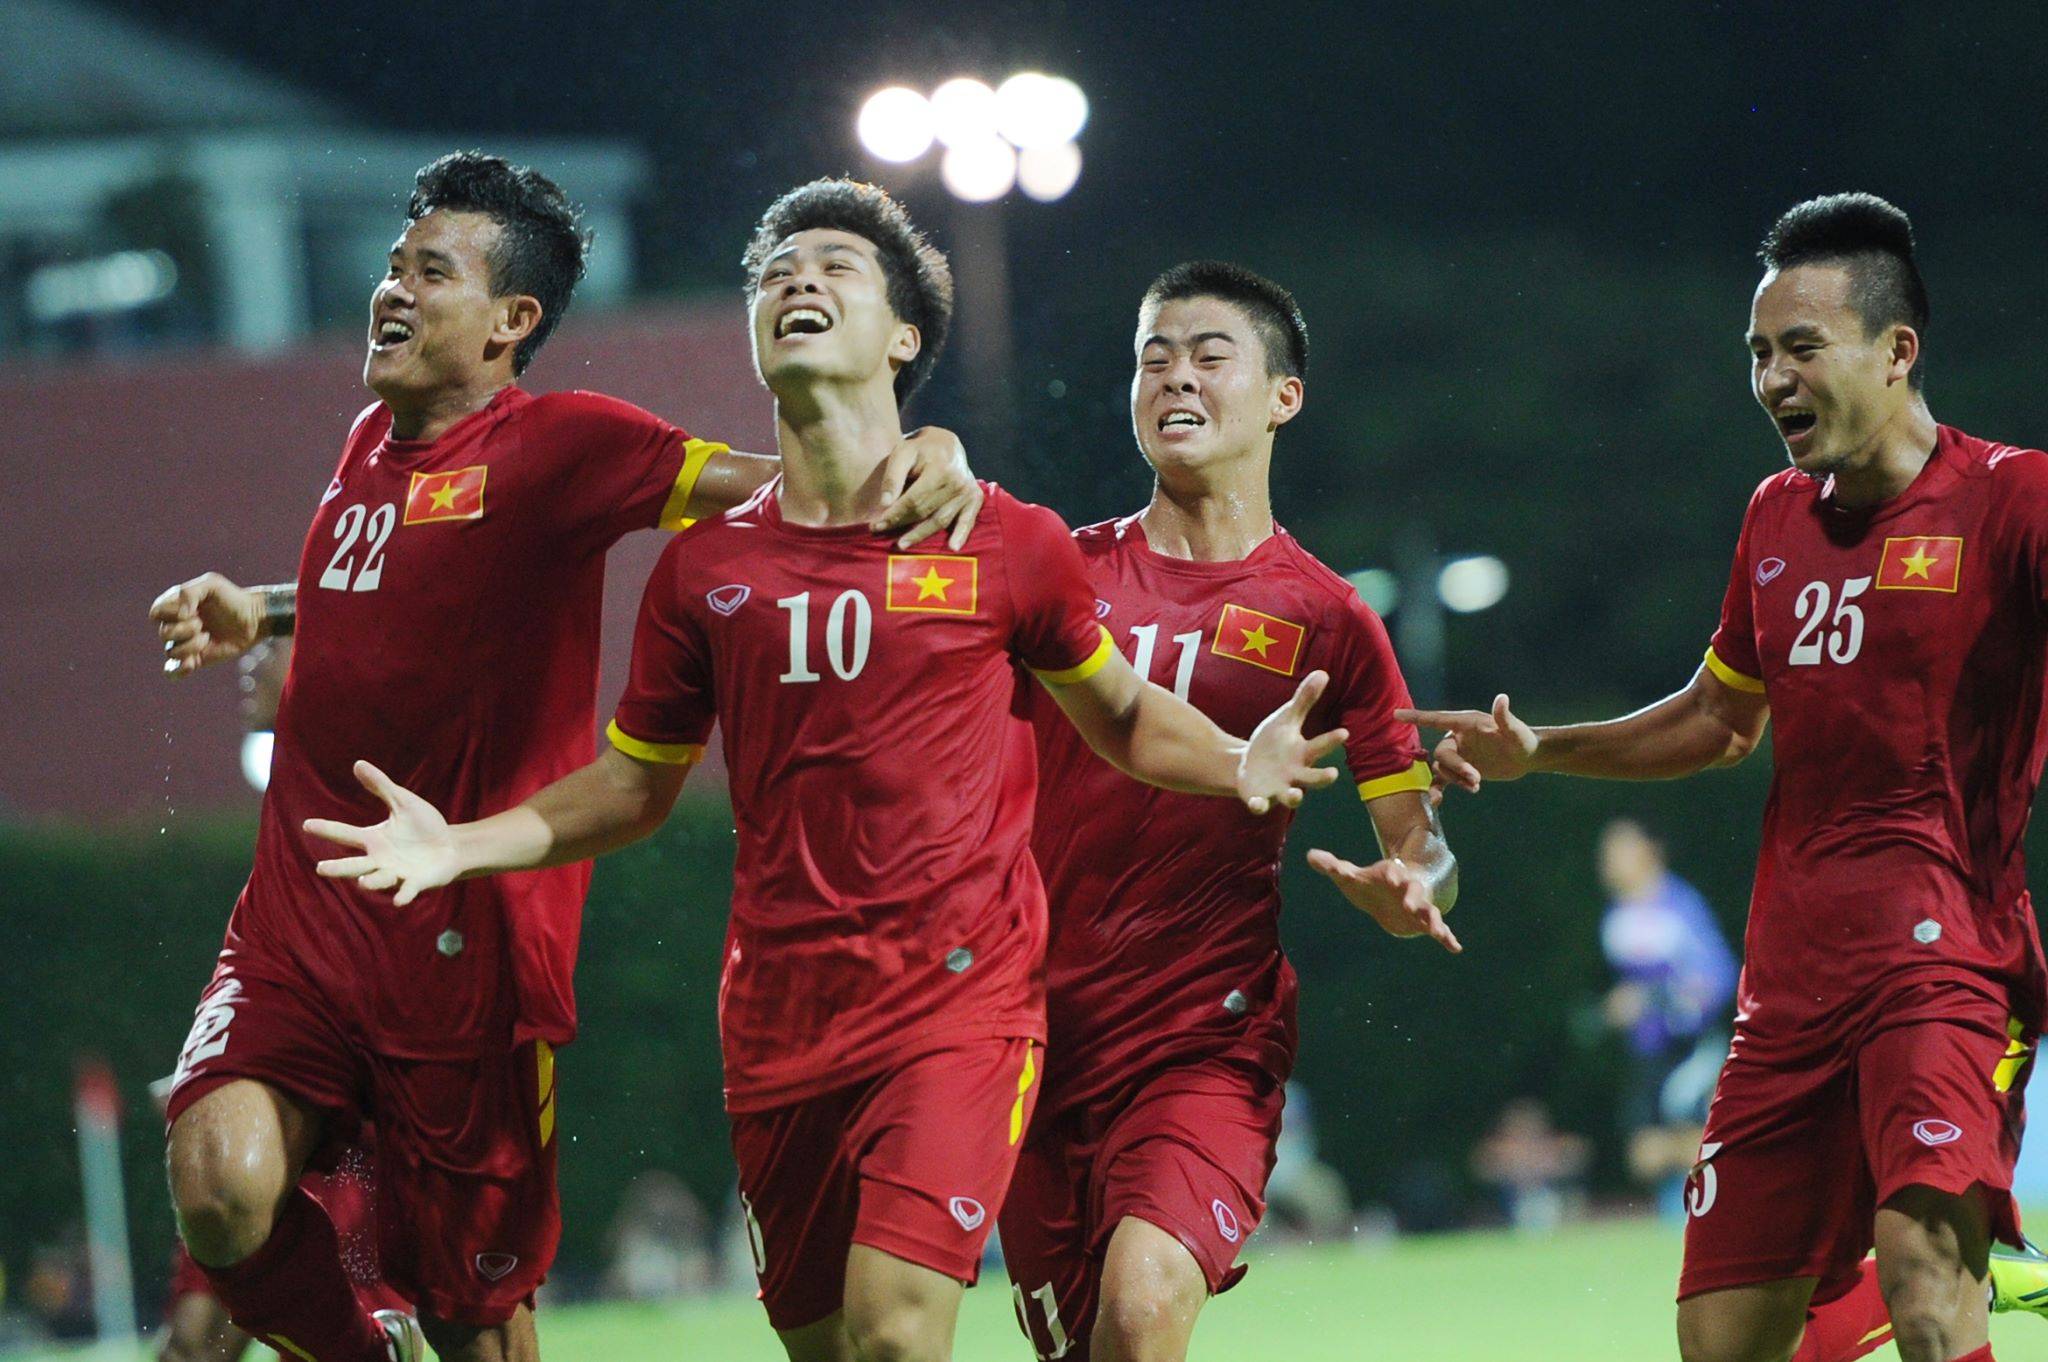 Việt Nam earn slot to compete in final round of AFC U23 